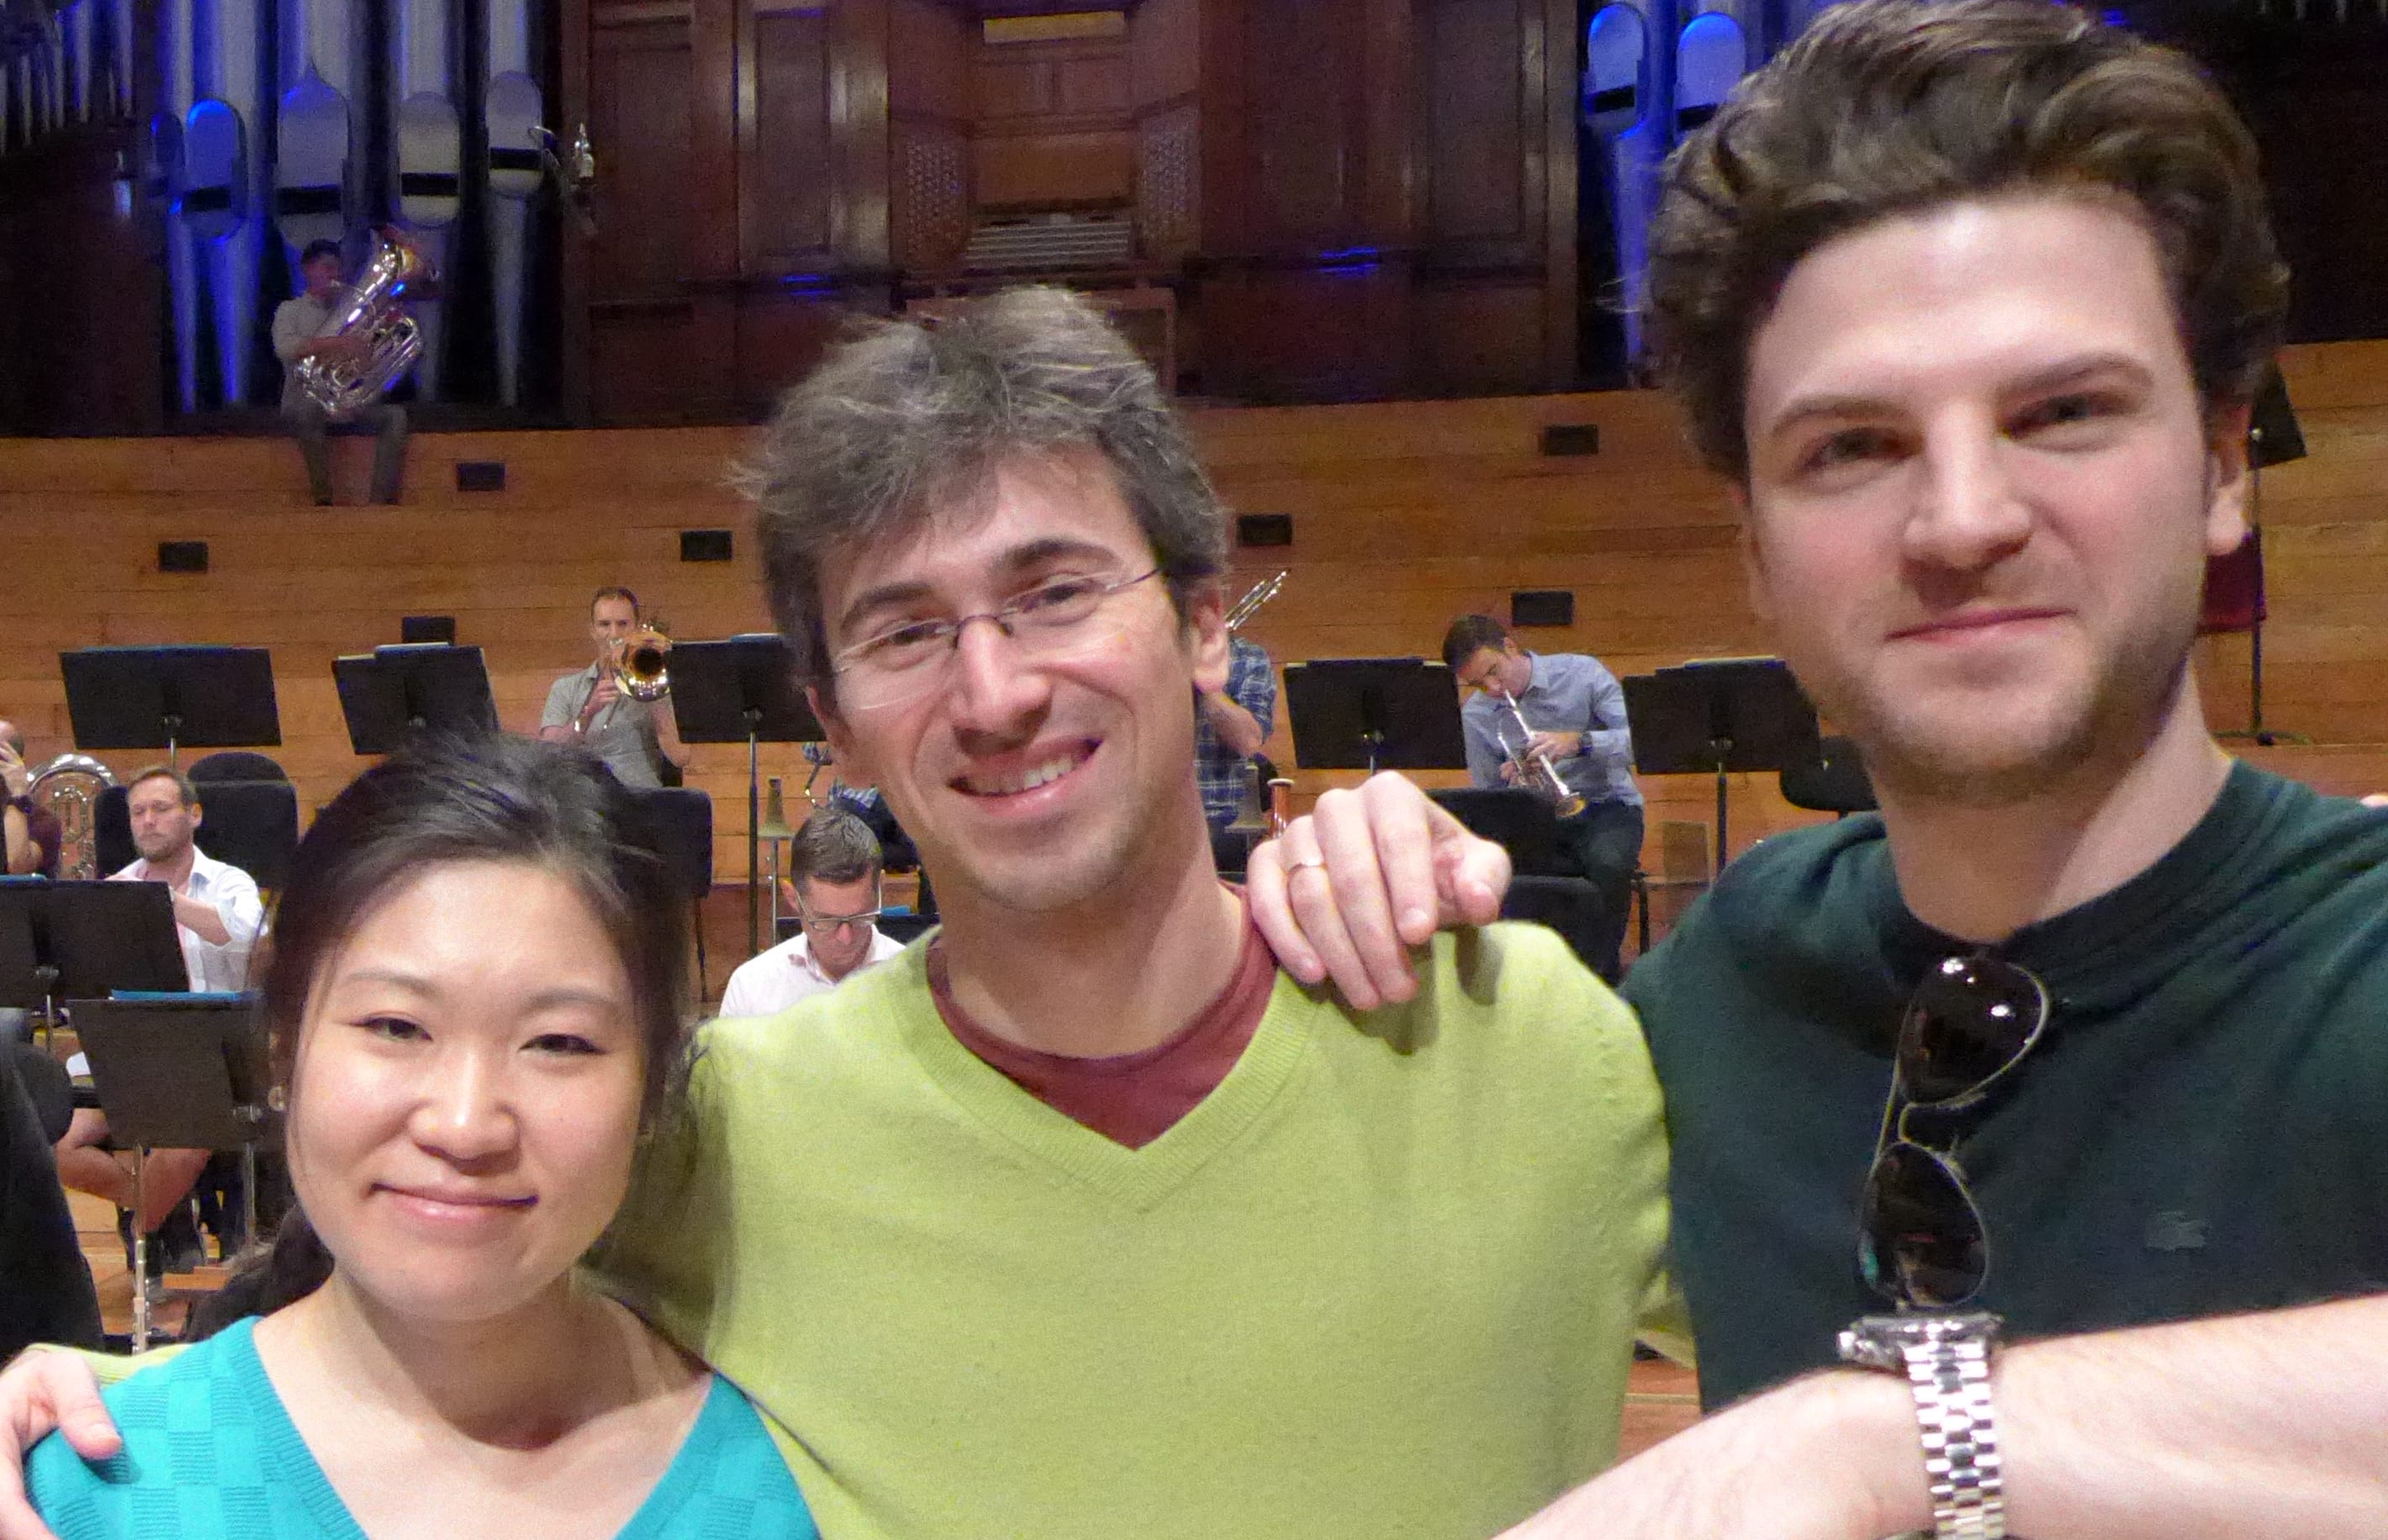 Sporting an appropriate t-shirt, our recording engineer Rangi Powick is with the three soloists for Beethoven's Triple Concerto, Tianwa Yang, Nicolas Rimmer, and Gabriel Schwabe